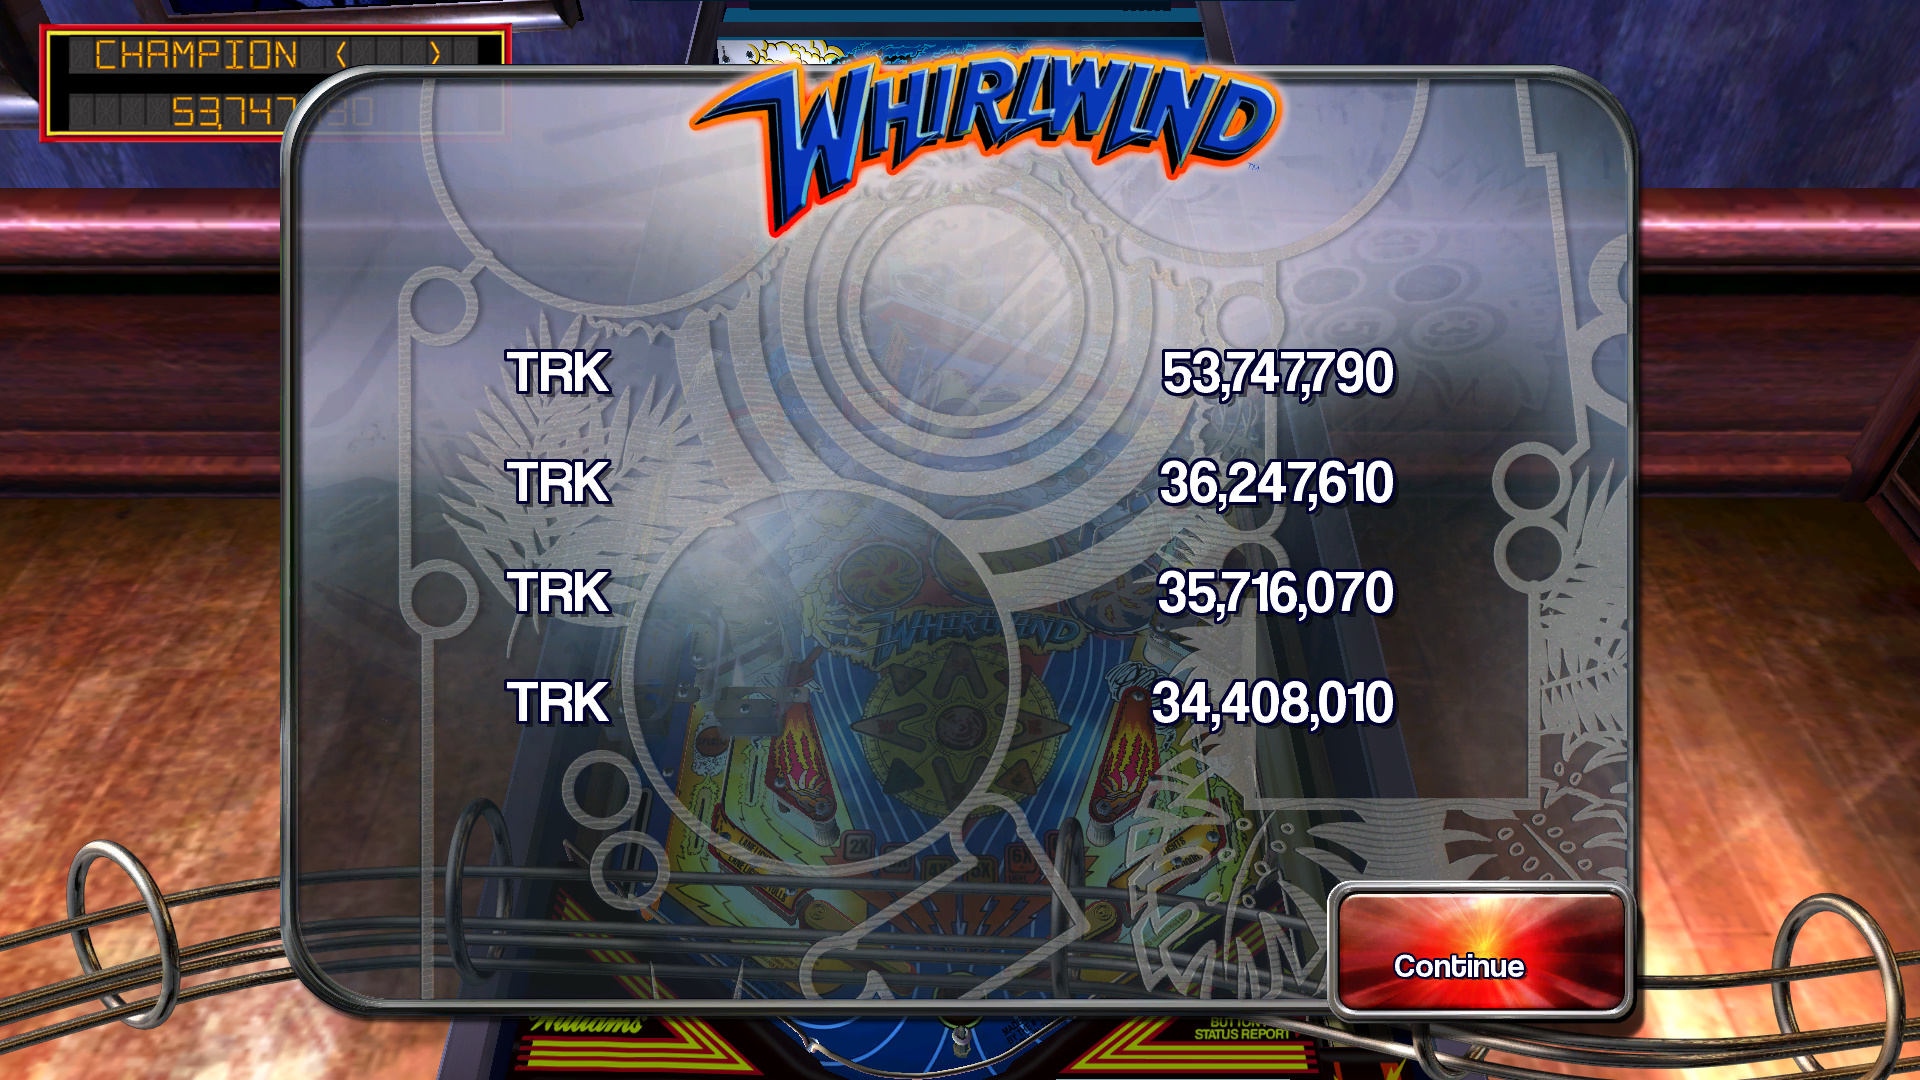 TheTrickster: Pinball Arcade: Whirlwind (PC) 53,747,790 points on 2015-10-10 15:33:12